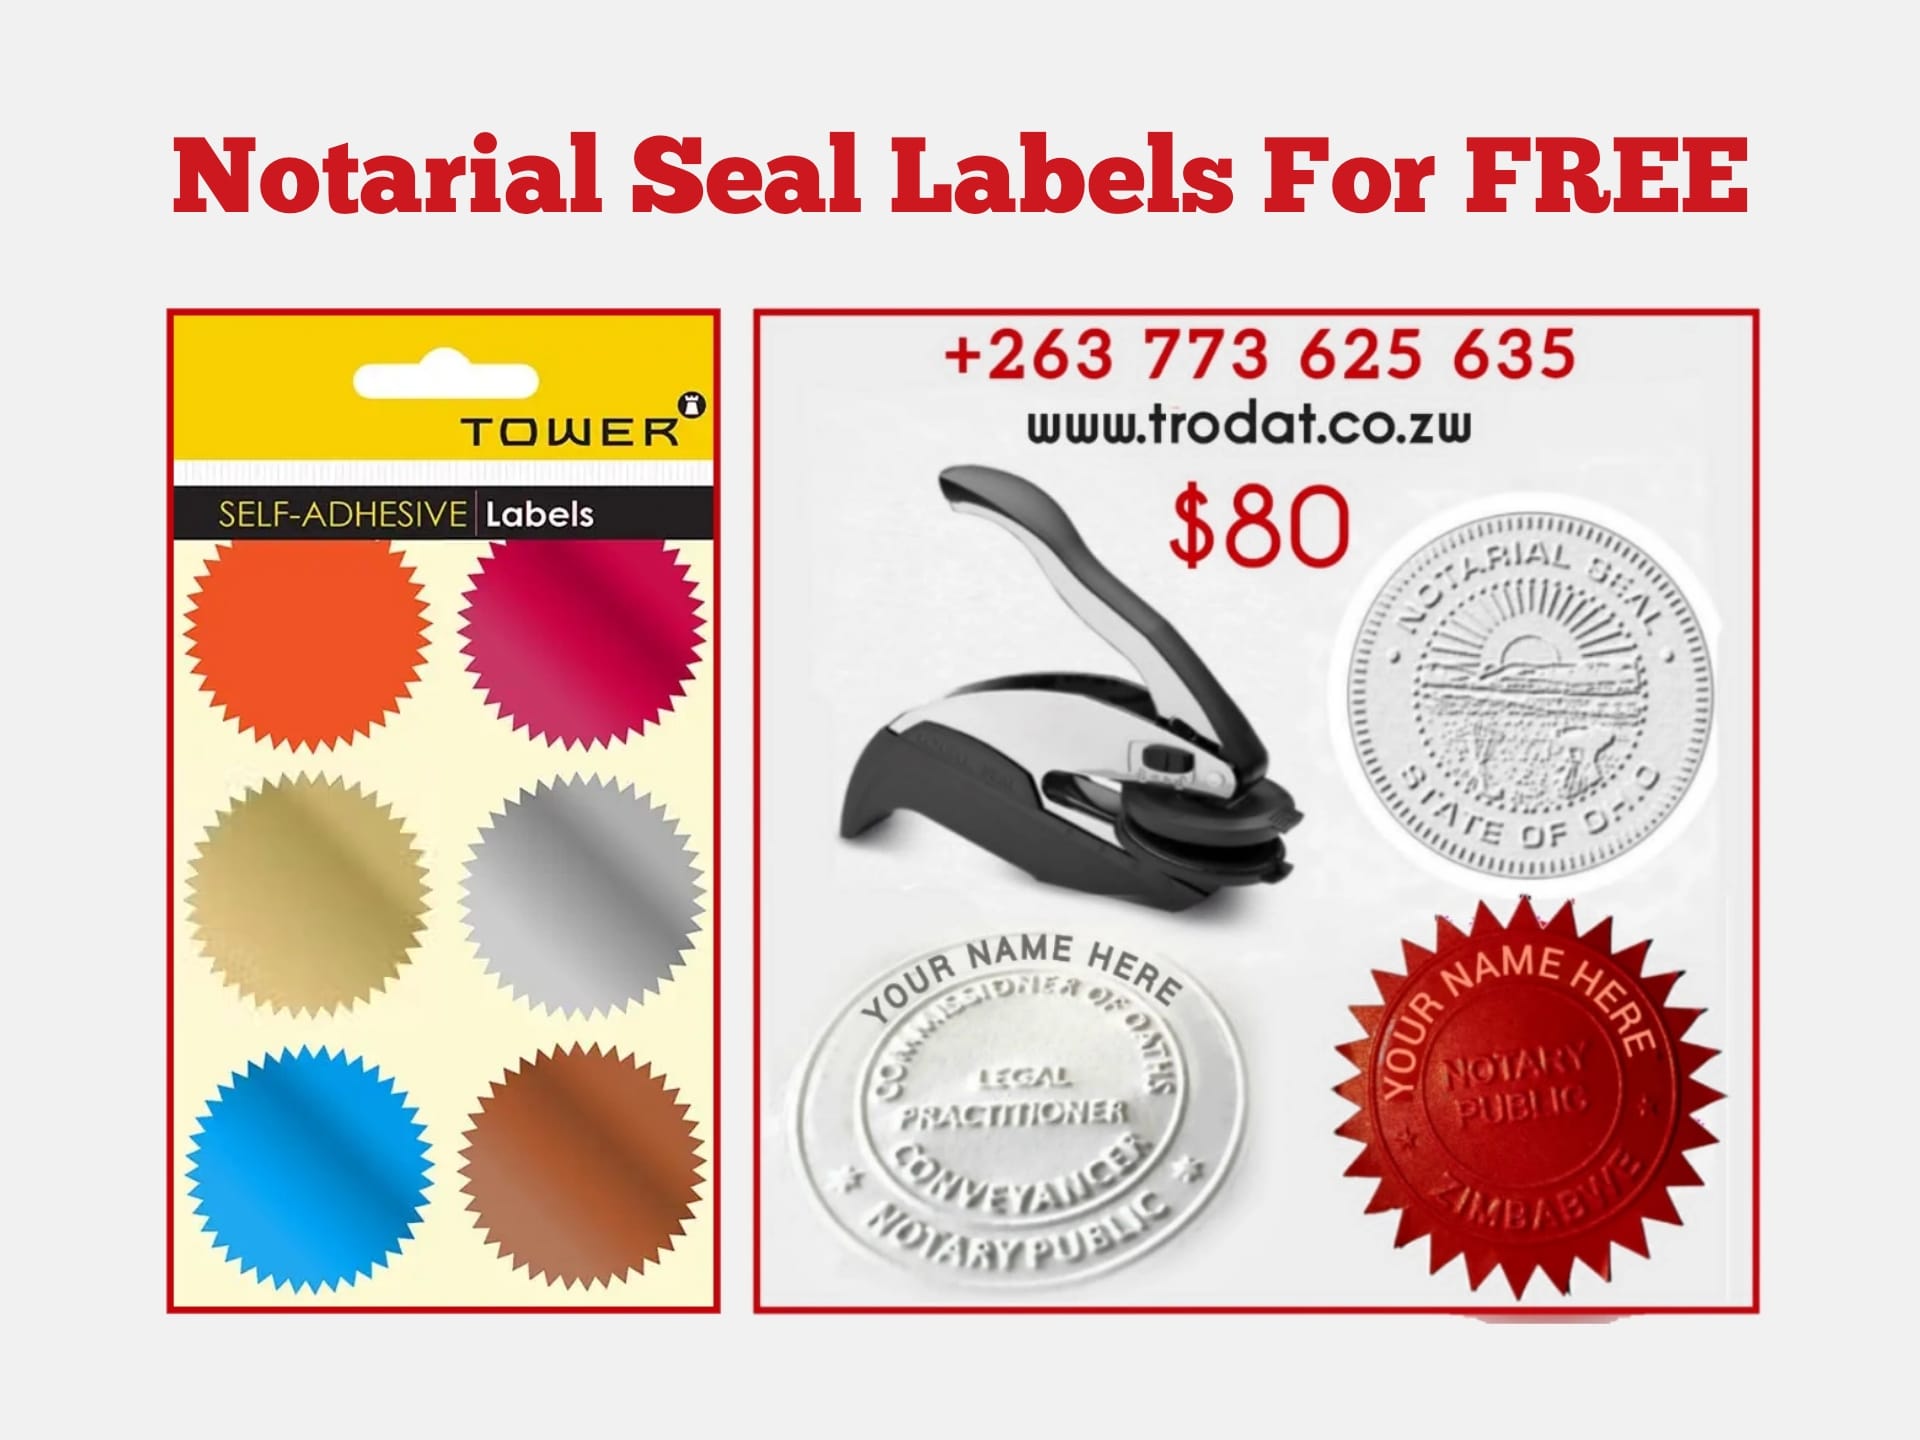 Get Tower Notarial Seals N50 Labels and Stickers for FREE